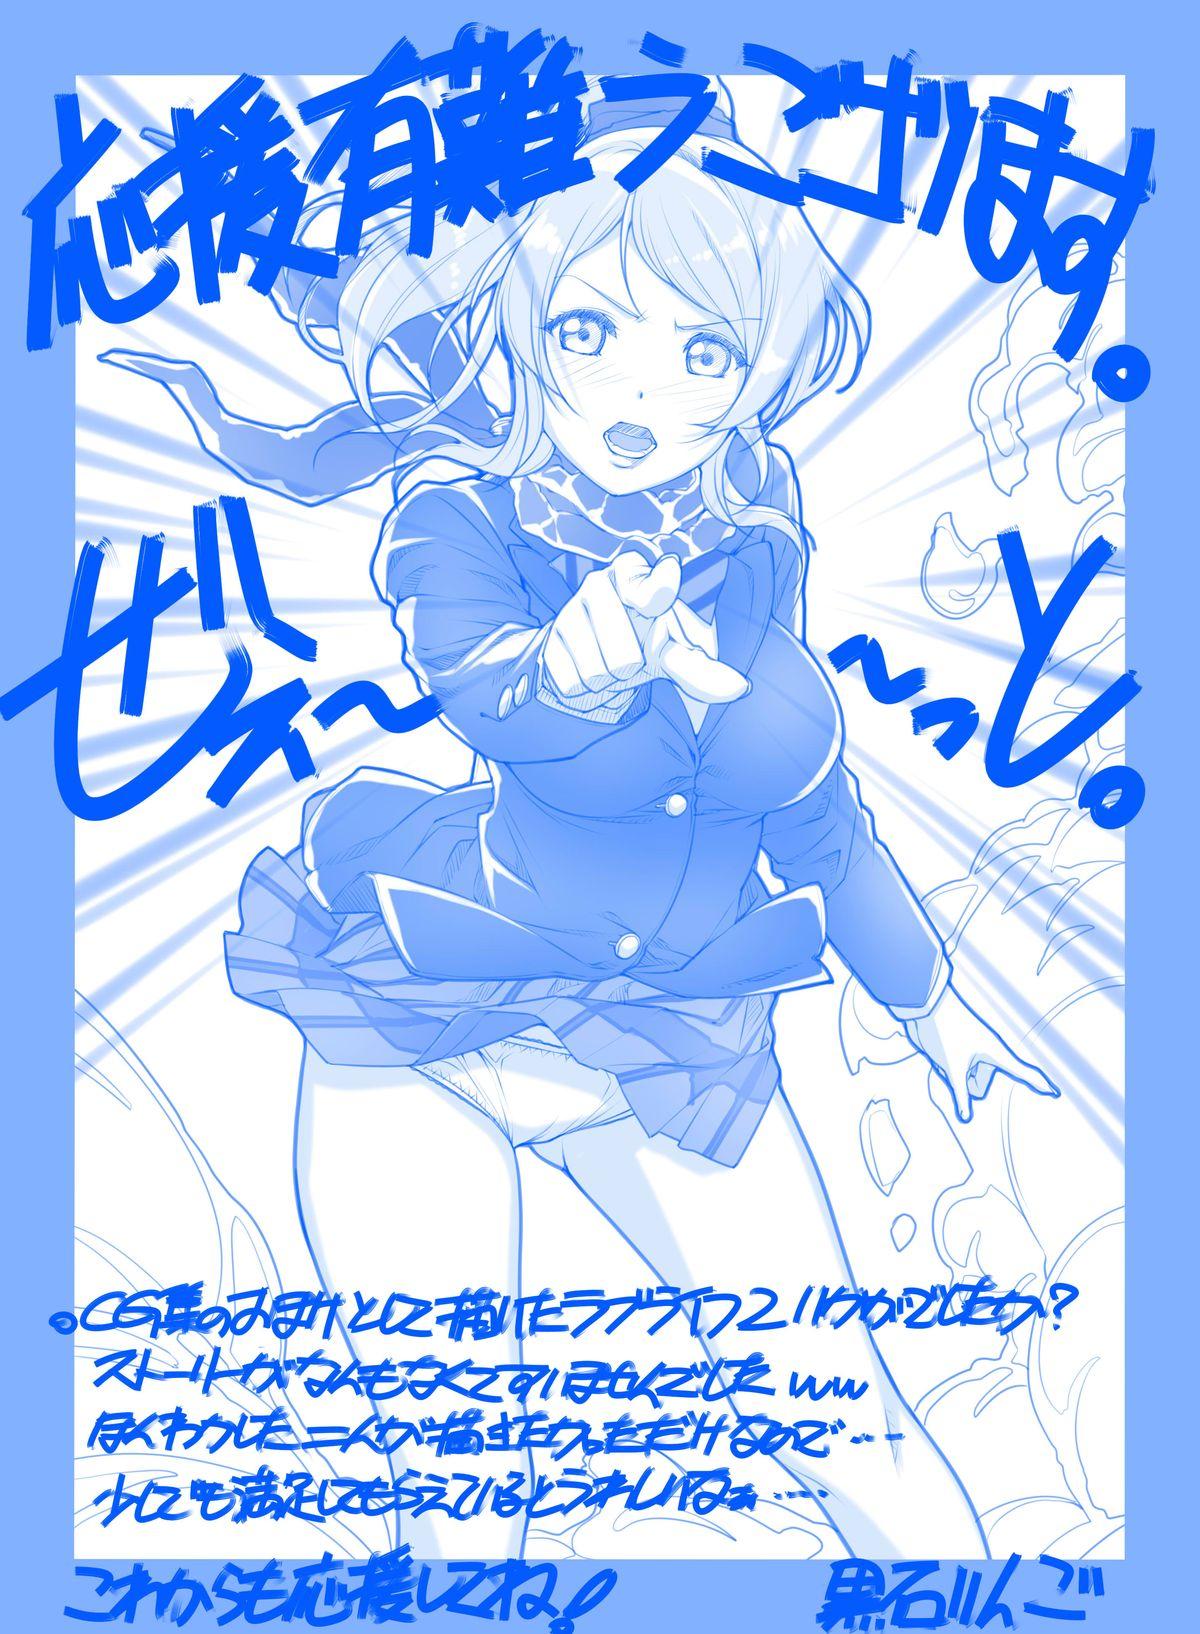 Self Illustration Requests & Love Life! 2 - Love live Gundam build fighters Mas - Page 36